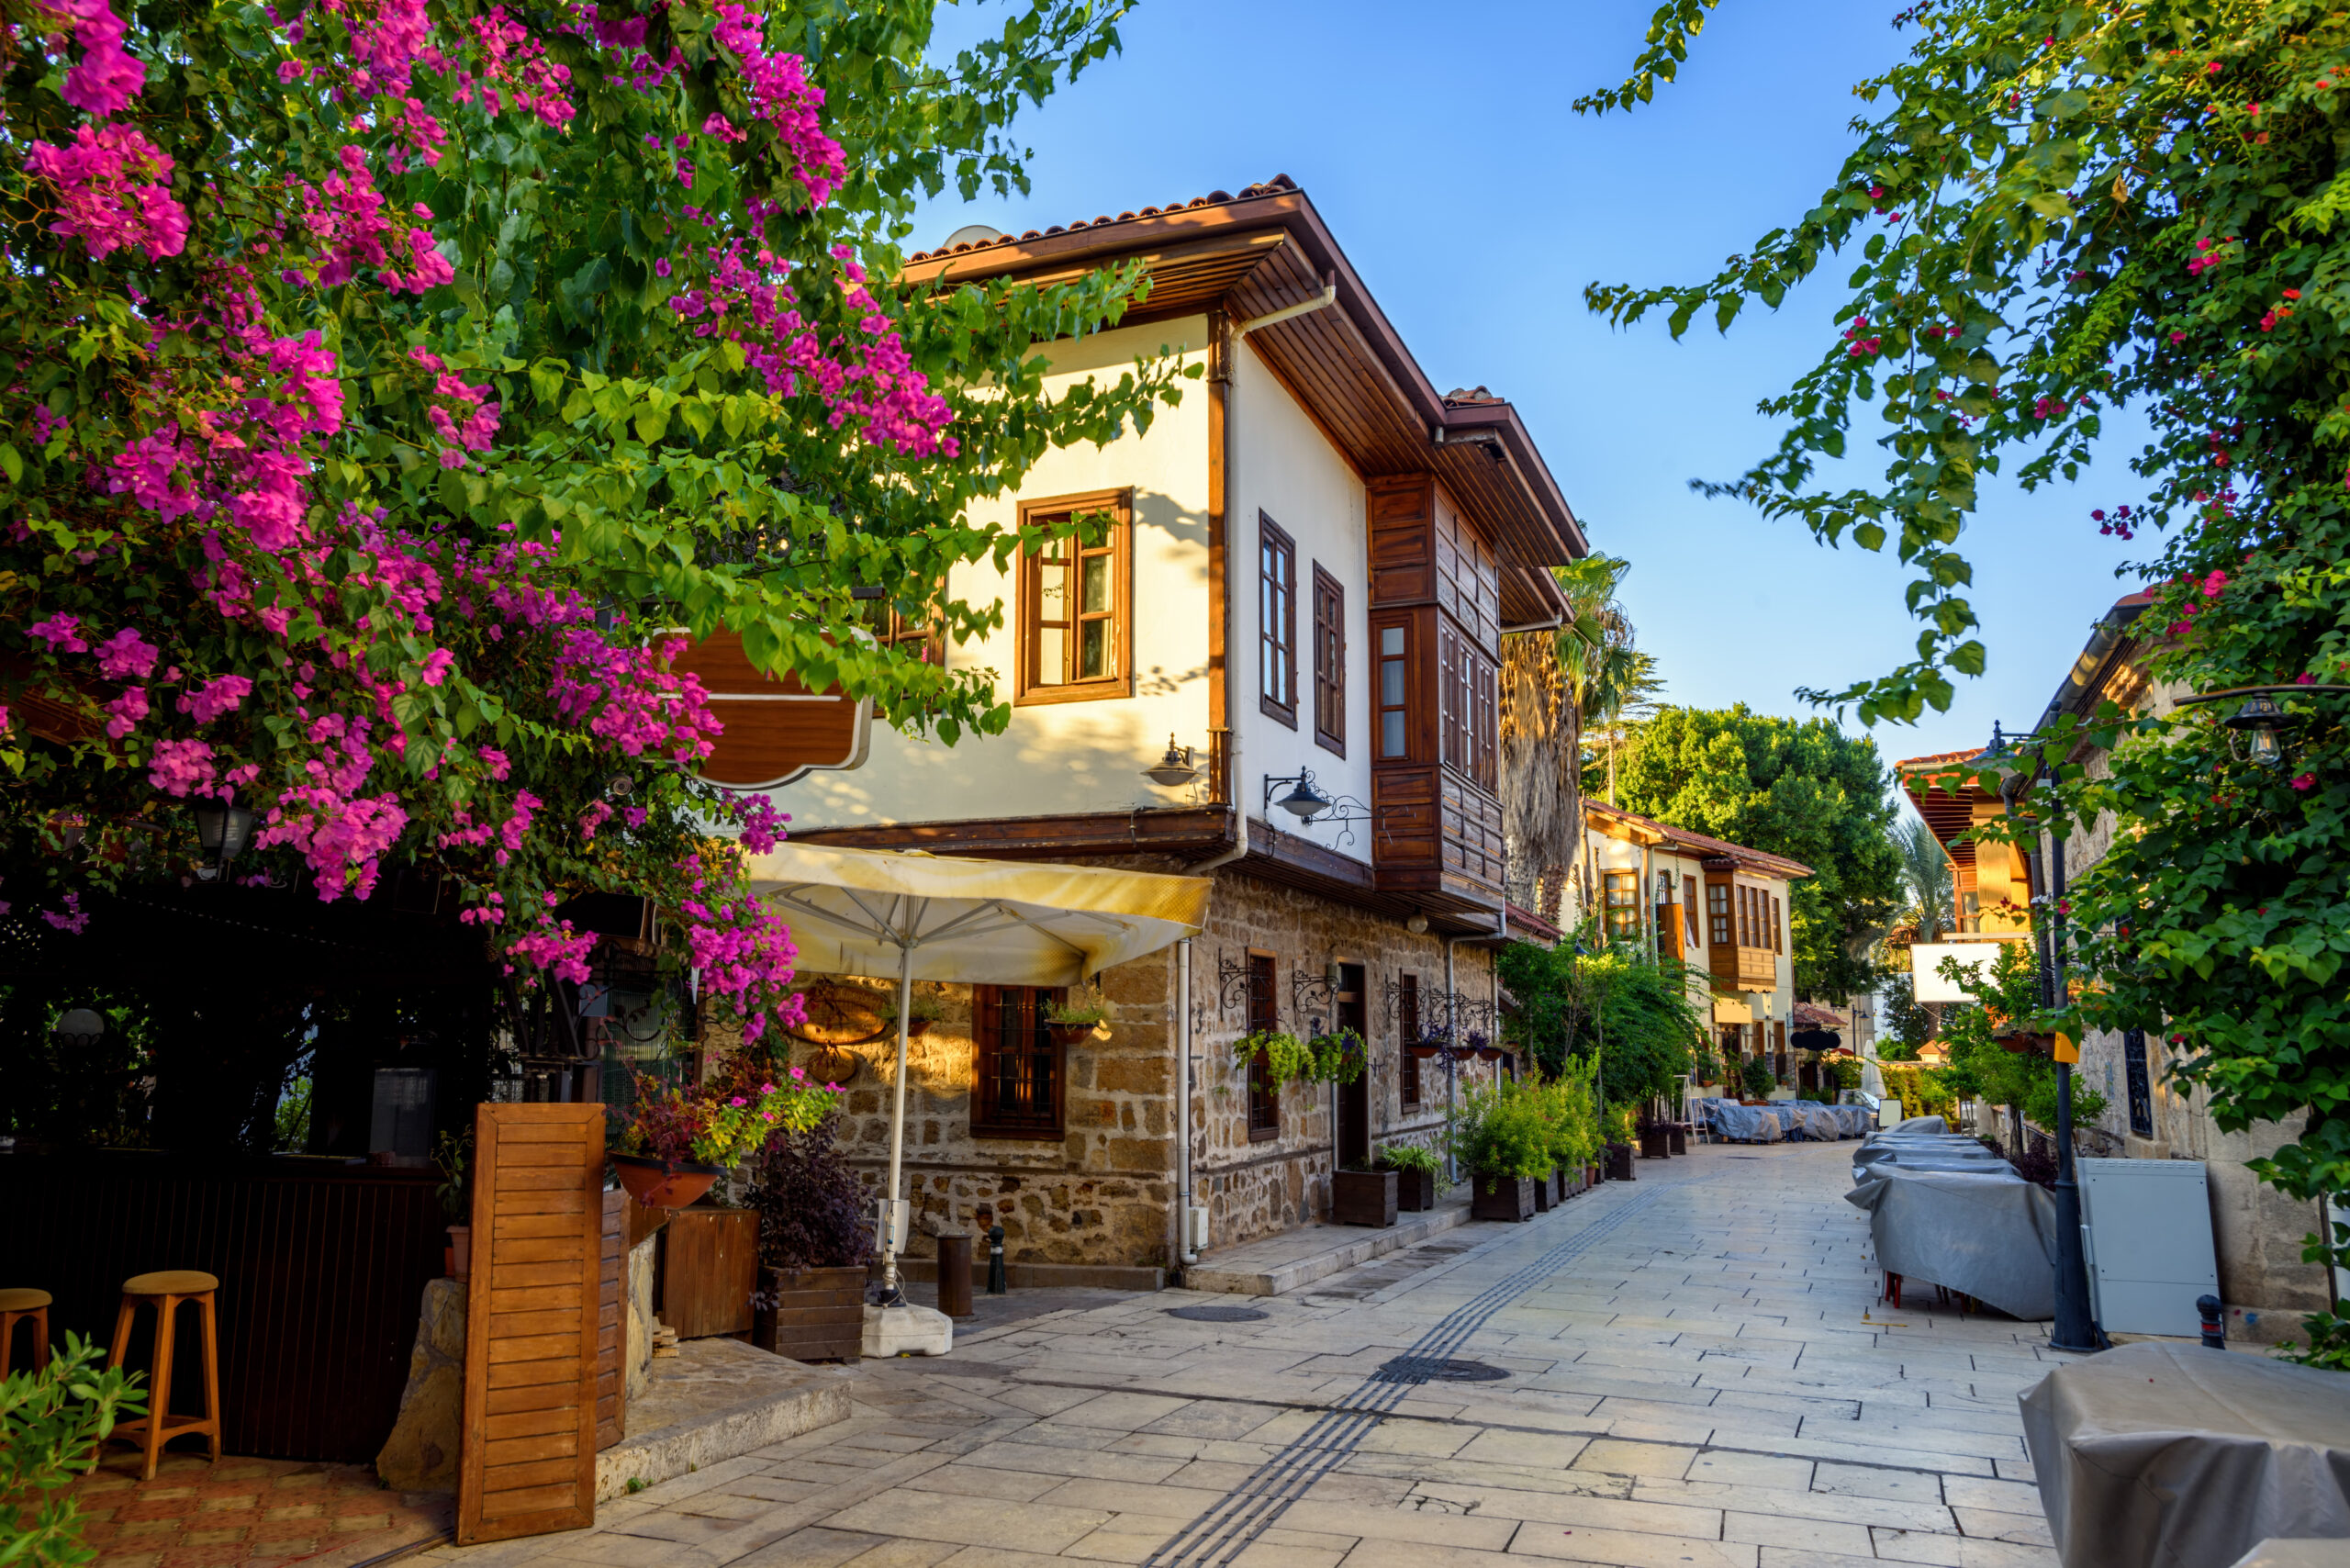 production-services-and-filming-in-turkey-pedestrian-street